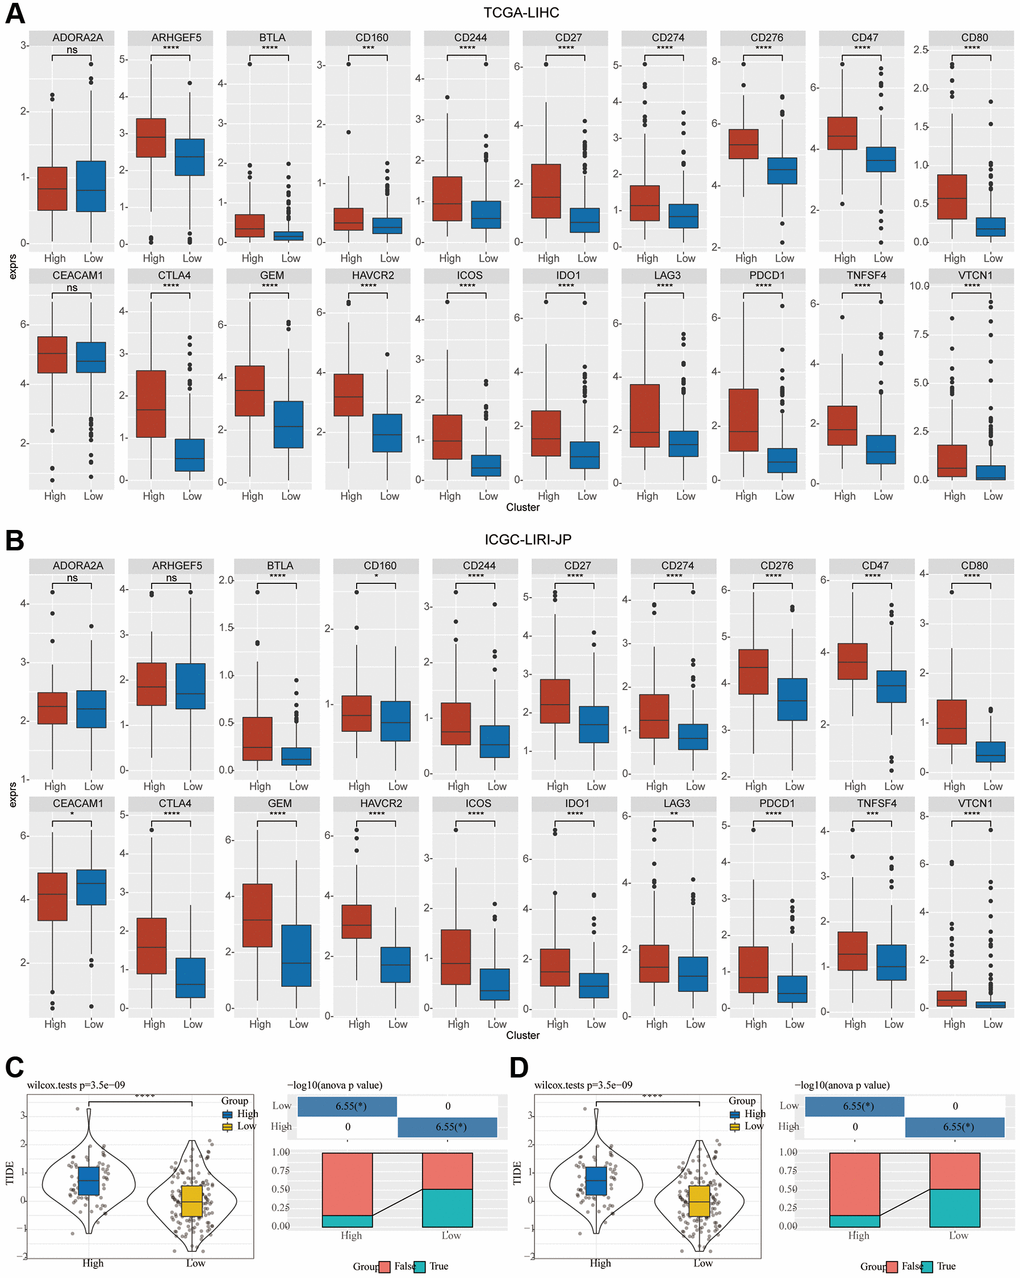 Investigation of the variation in immunotherapy across mTORC1-related subgroups. (A, B) The boxplots illustrate the immune checkpoints that were upregulated in C1 in comparison with C2 in TCGA-LIHC and ICGC-LIRI-JP cohorts. (C) Variations in the TIDE score and immune response status of the diverse molecular subtypes in the TCGA-LIHC cohort. (D) Variations in the TIDE score and immune response status of the diverse molecular subtypes in the ICGC-LIRI-JP cohort.